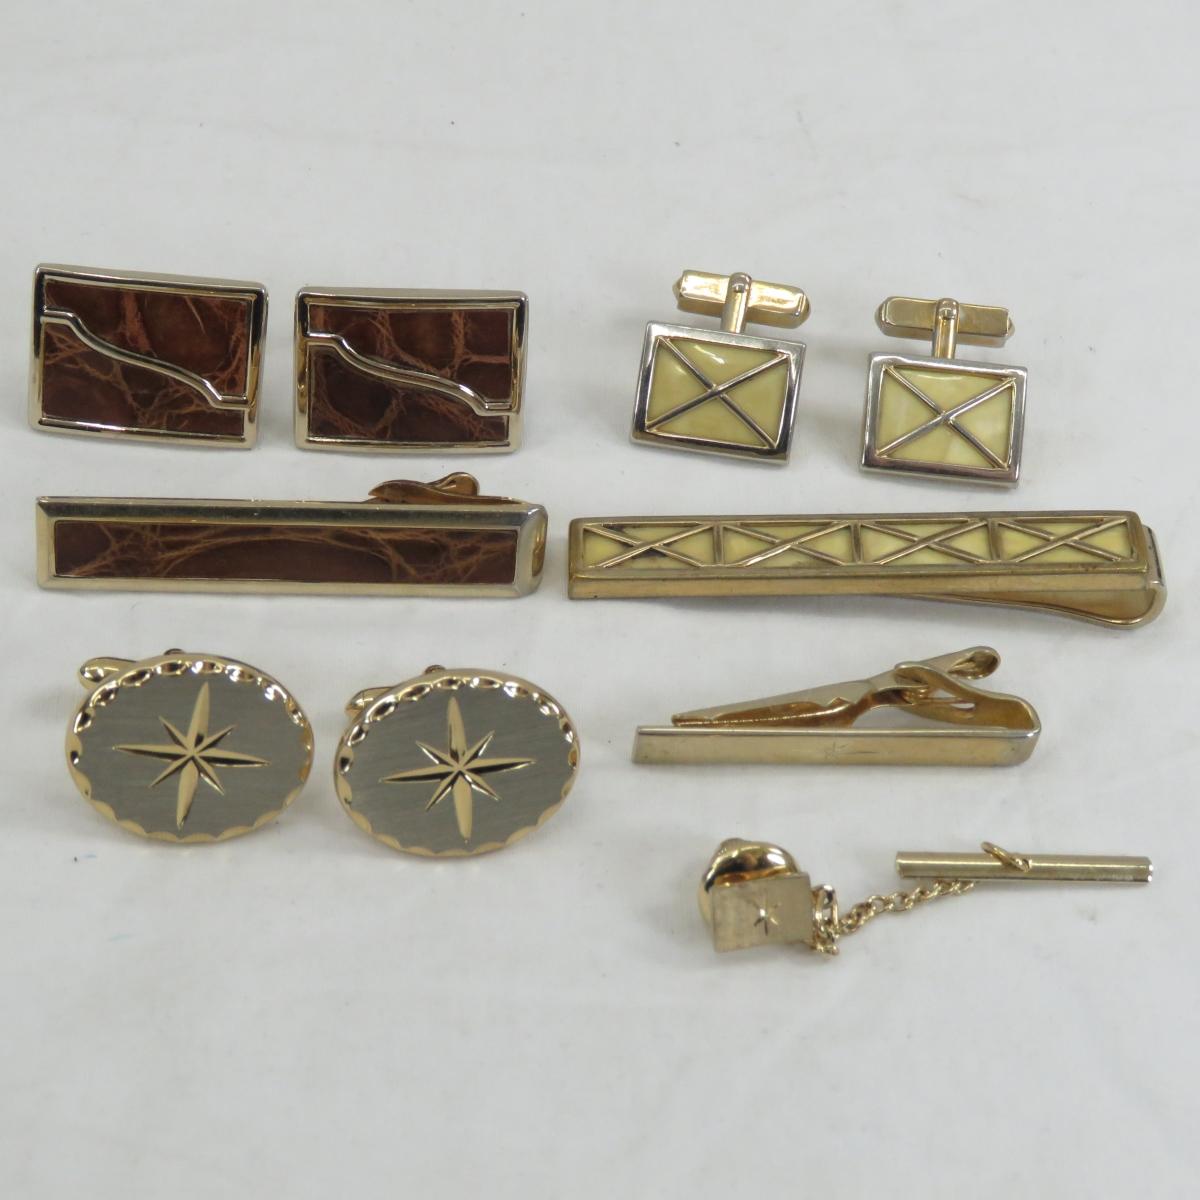 Cufflinks, Sets, Tie Tacs, & Ring in Case